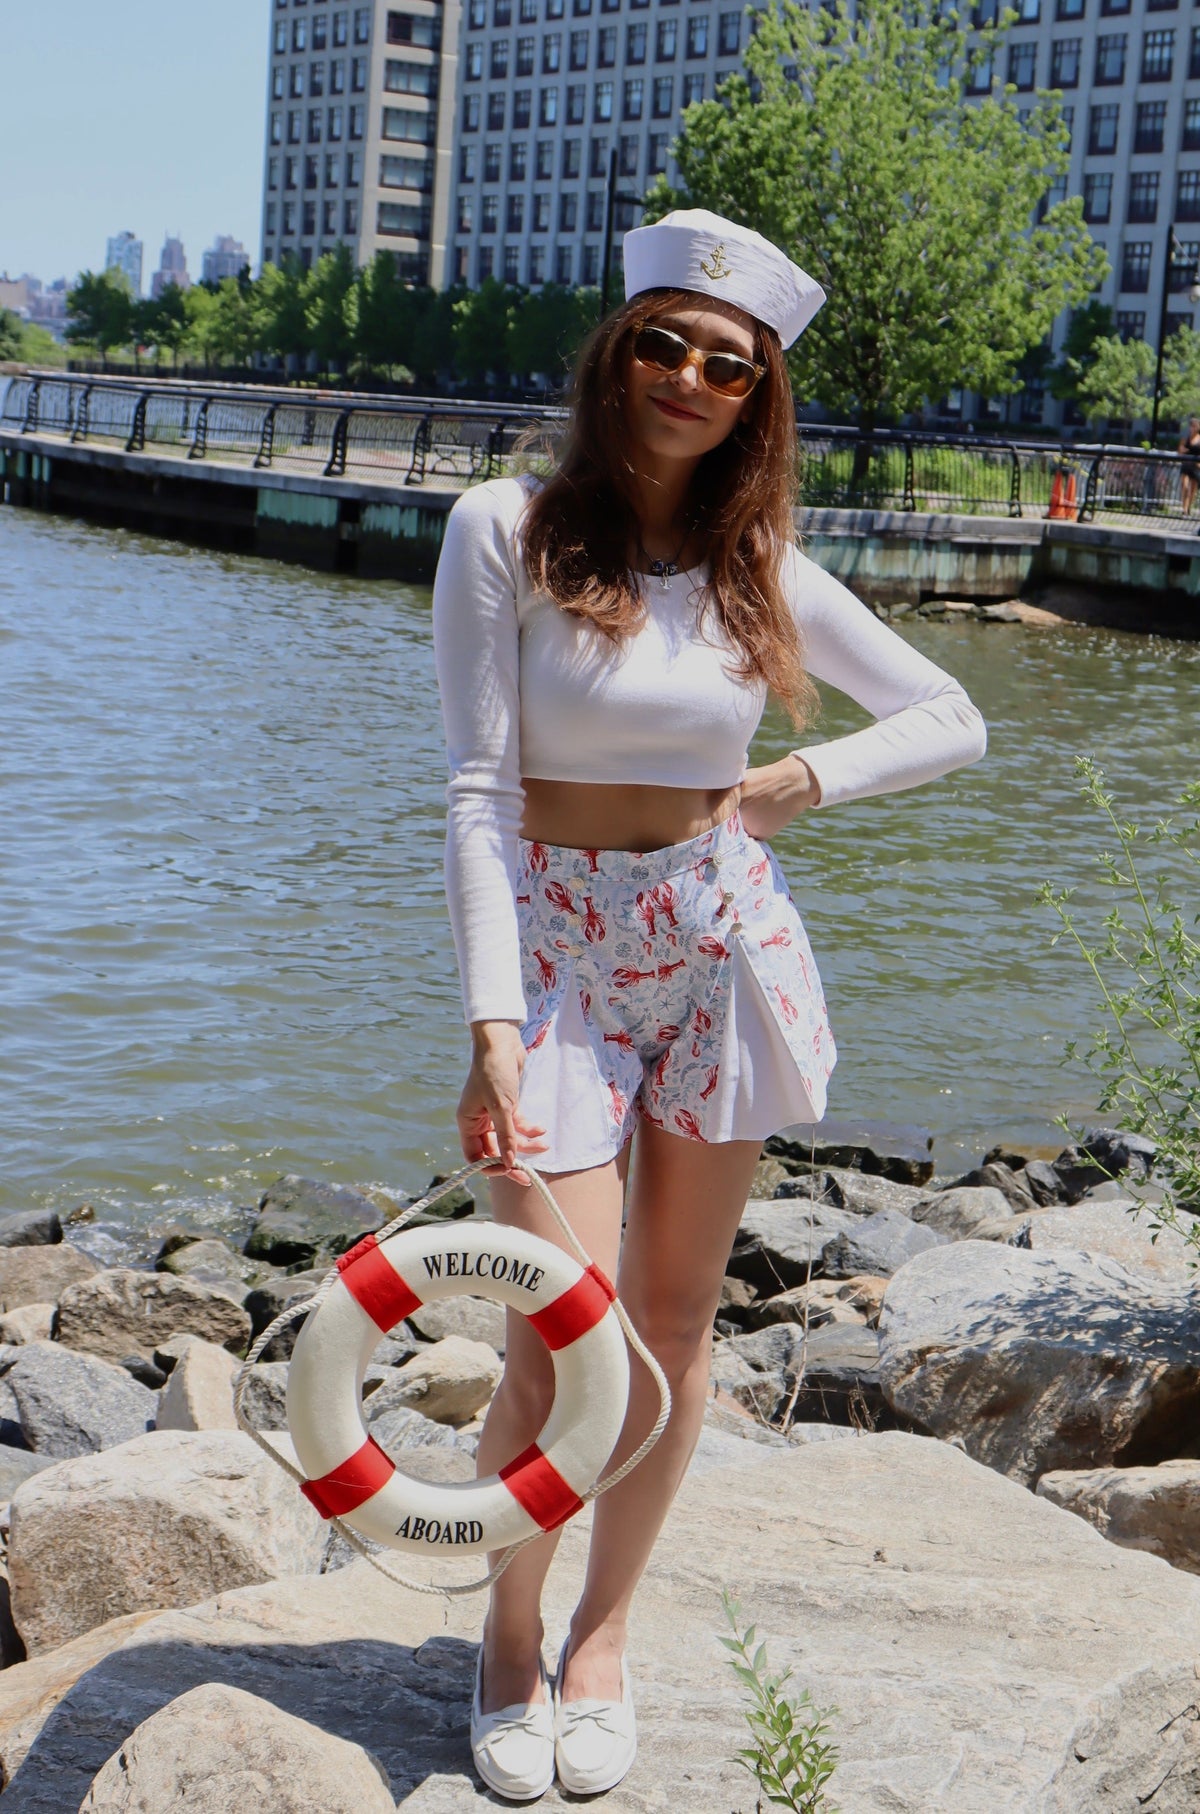 Model wearing pleated blue and red lobster print cotton shorts and white long sleeve crop top, with her hand on her hip, standing on rocks in front of a river, holding a a red and white buoy.